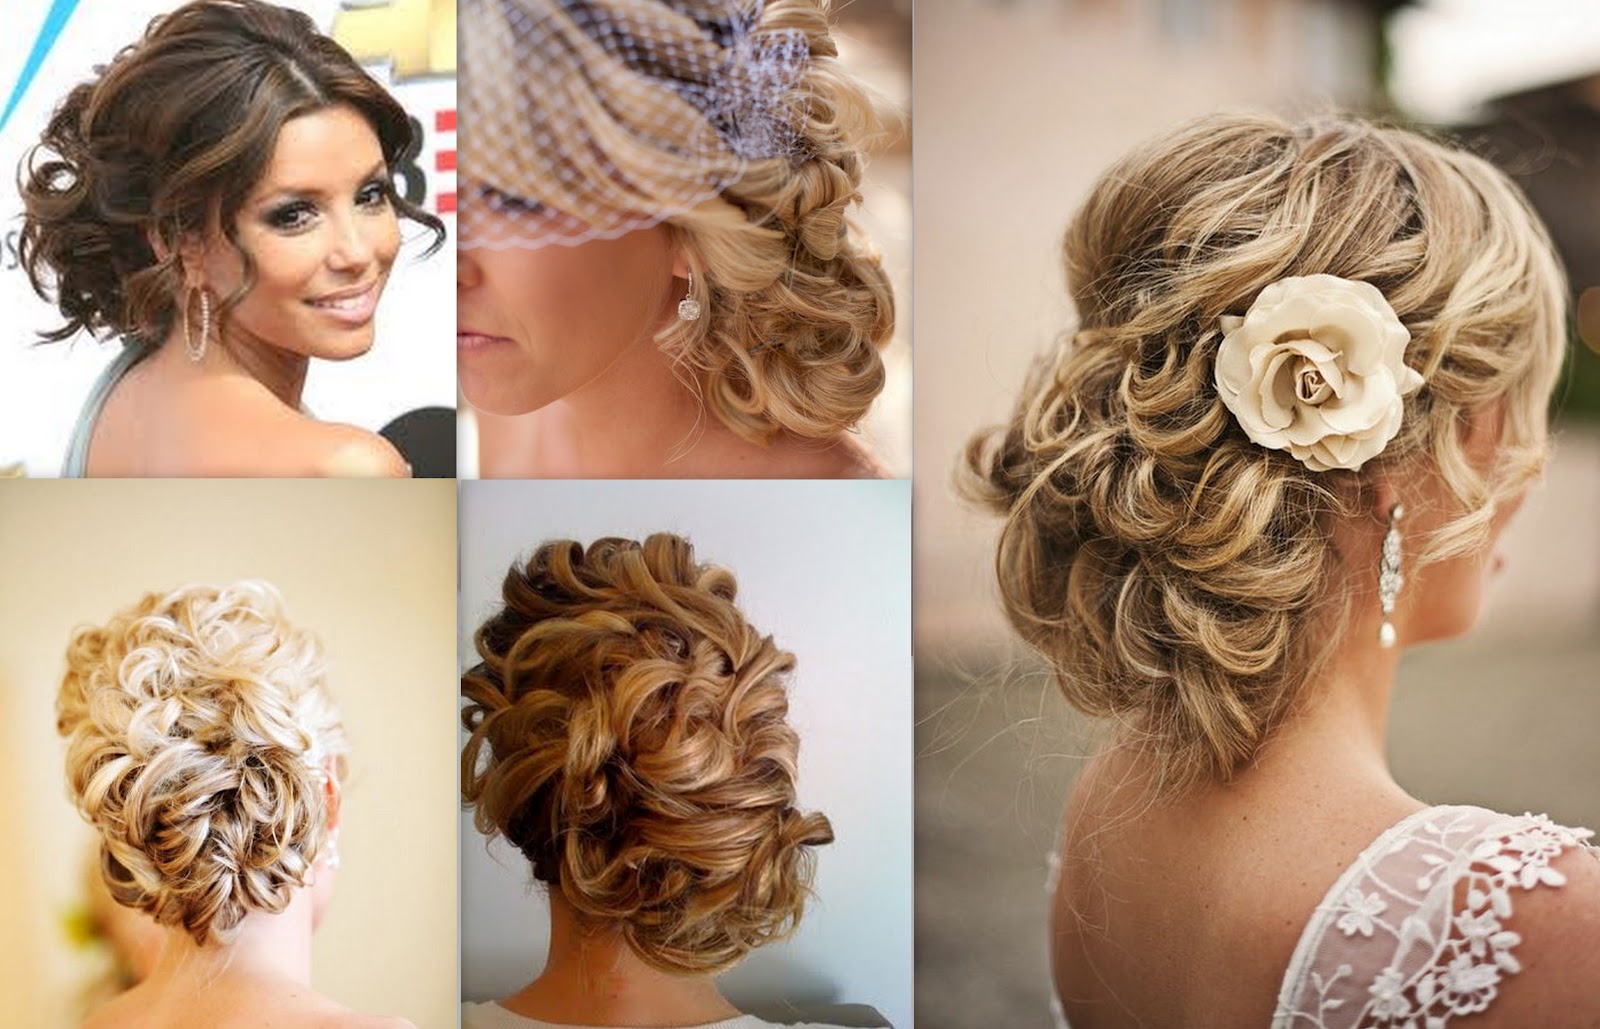 Let’s know about some Wedding Hairstyles